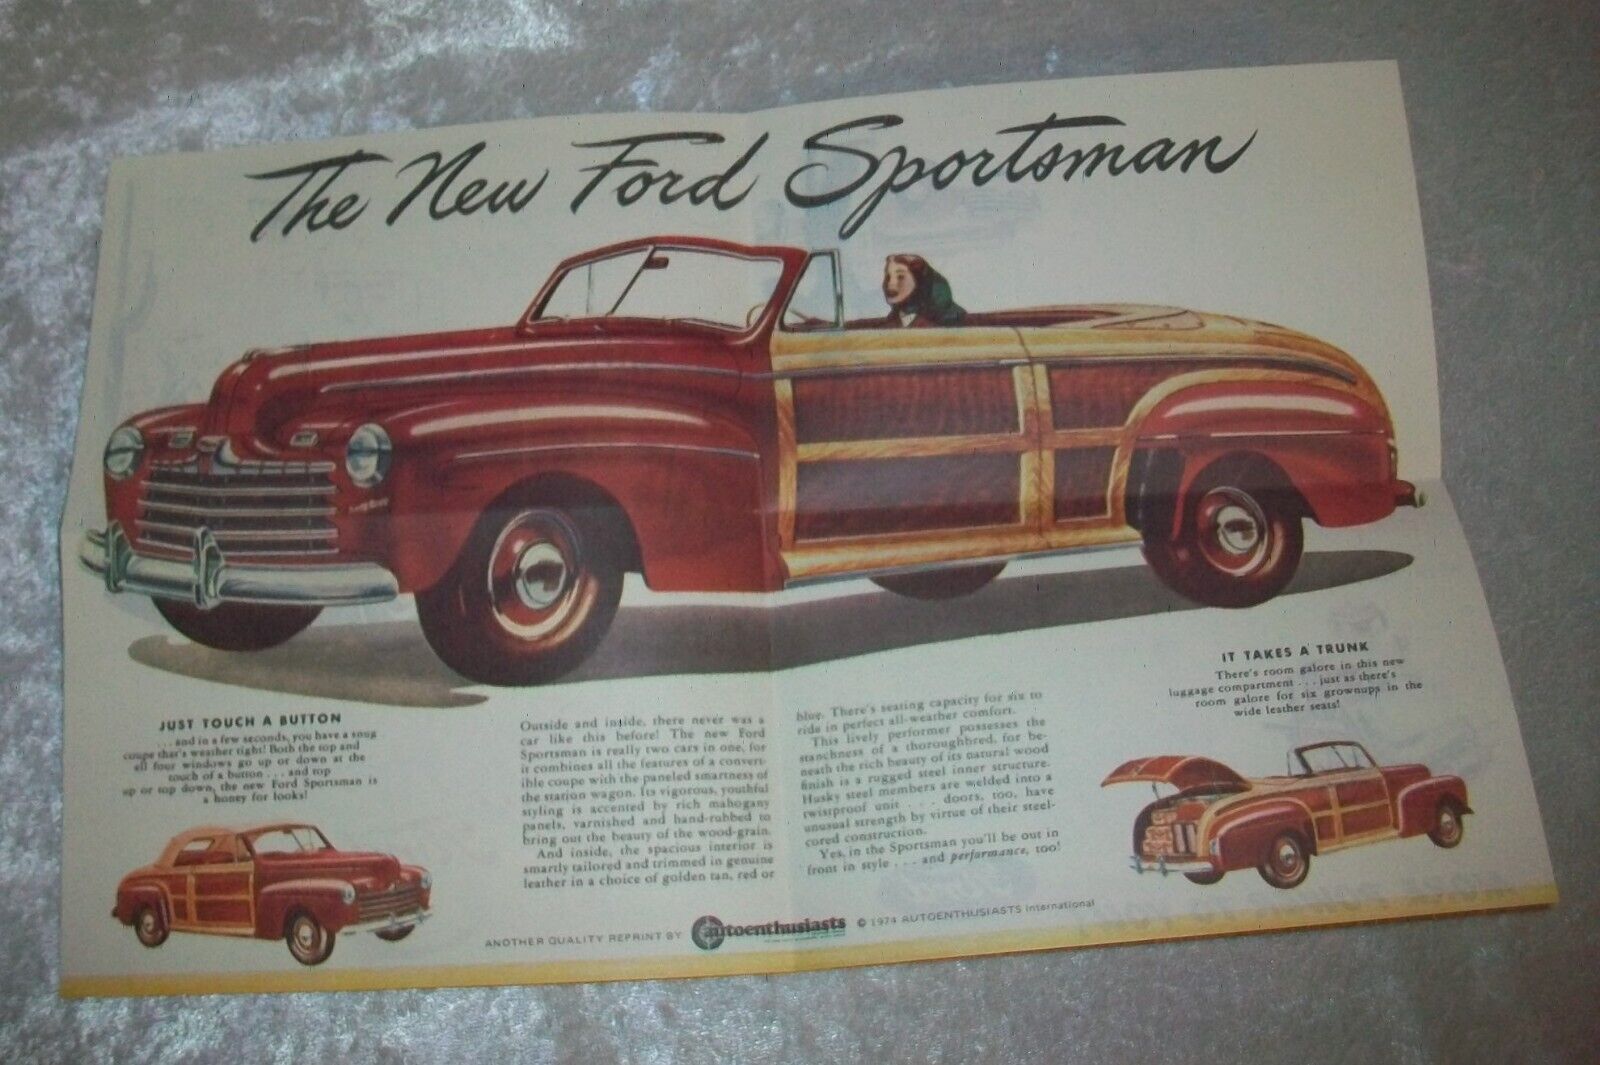 Vintage 1946 Ford Sportsman Woody Convertible Coupe Car Automobile Ad Reprint